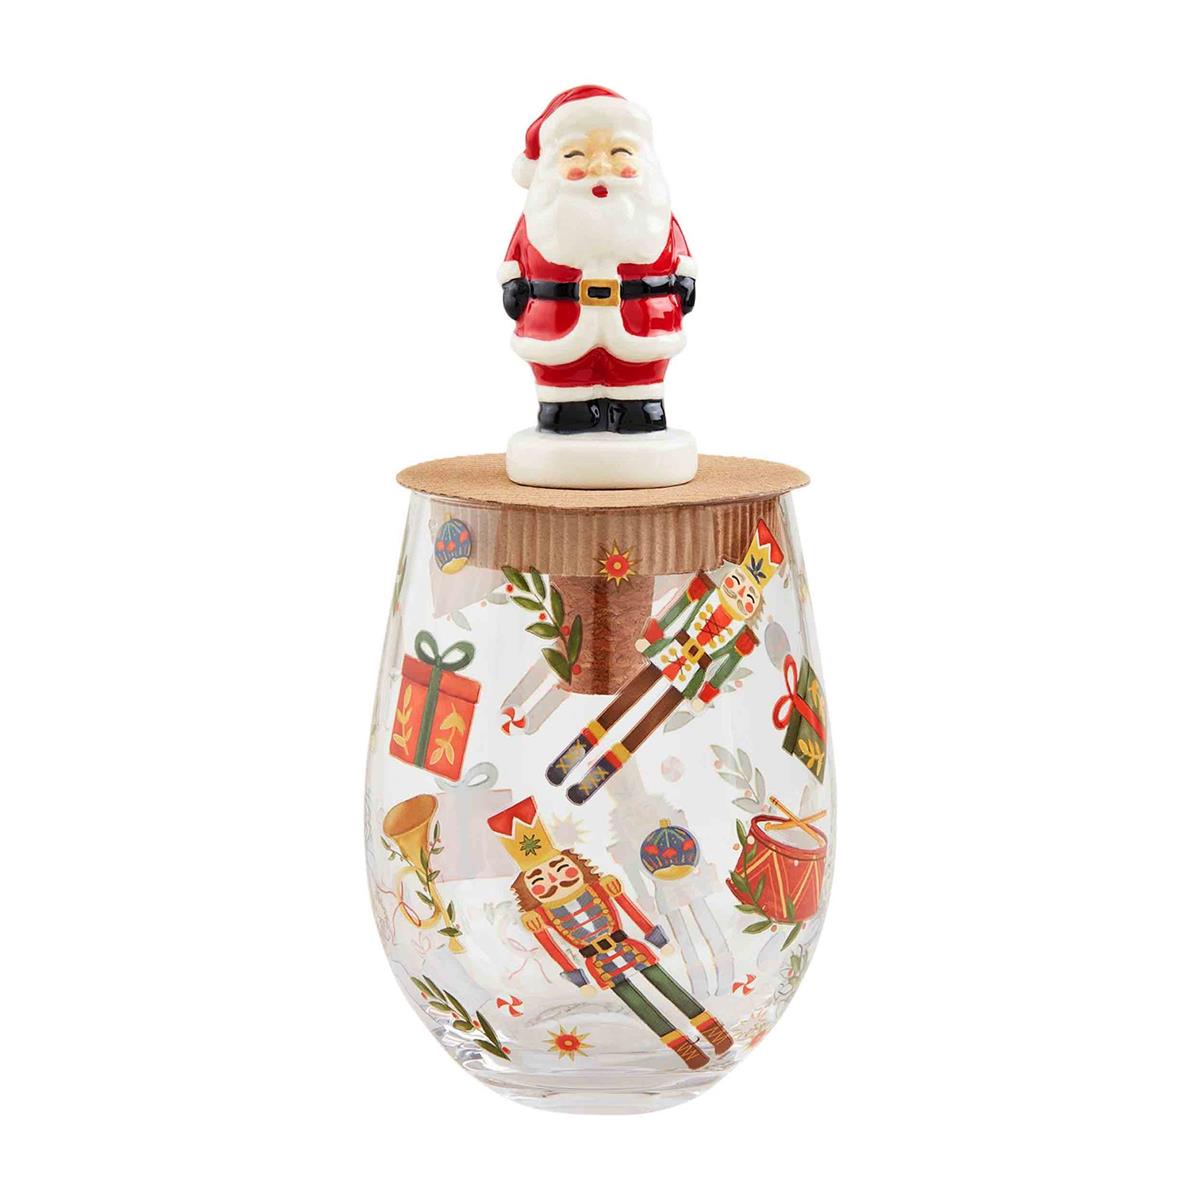 nutcracker wine glass with santa stopper set displayed against a white background